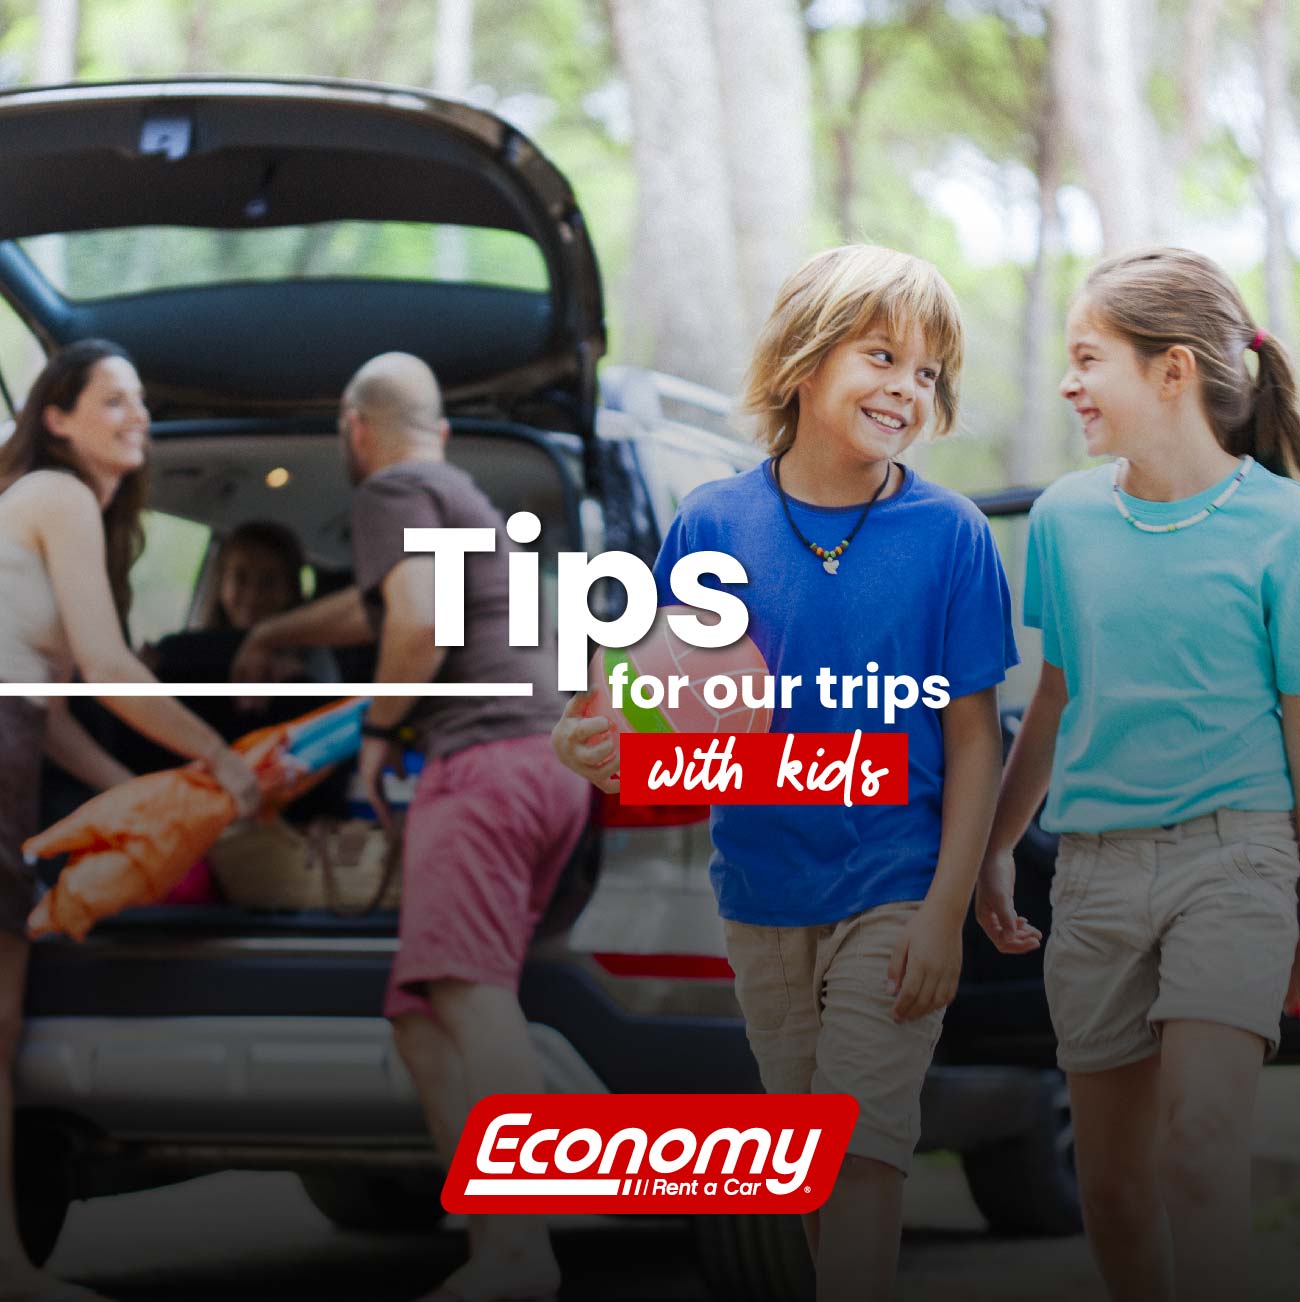 Tips for your trips with kids